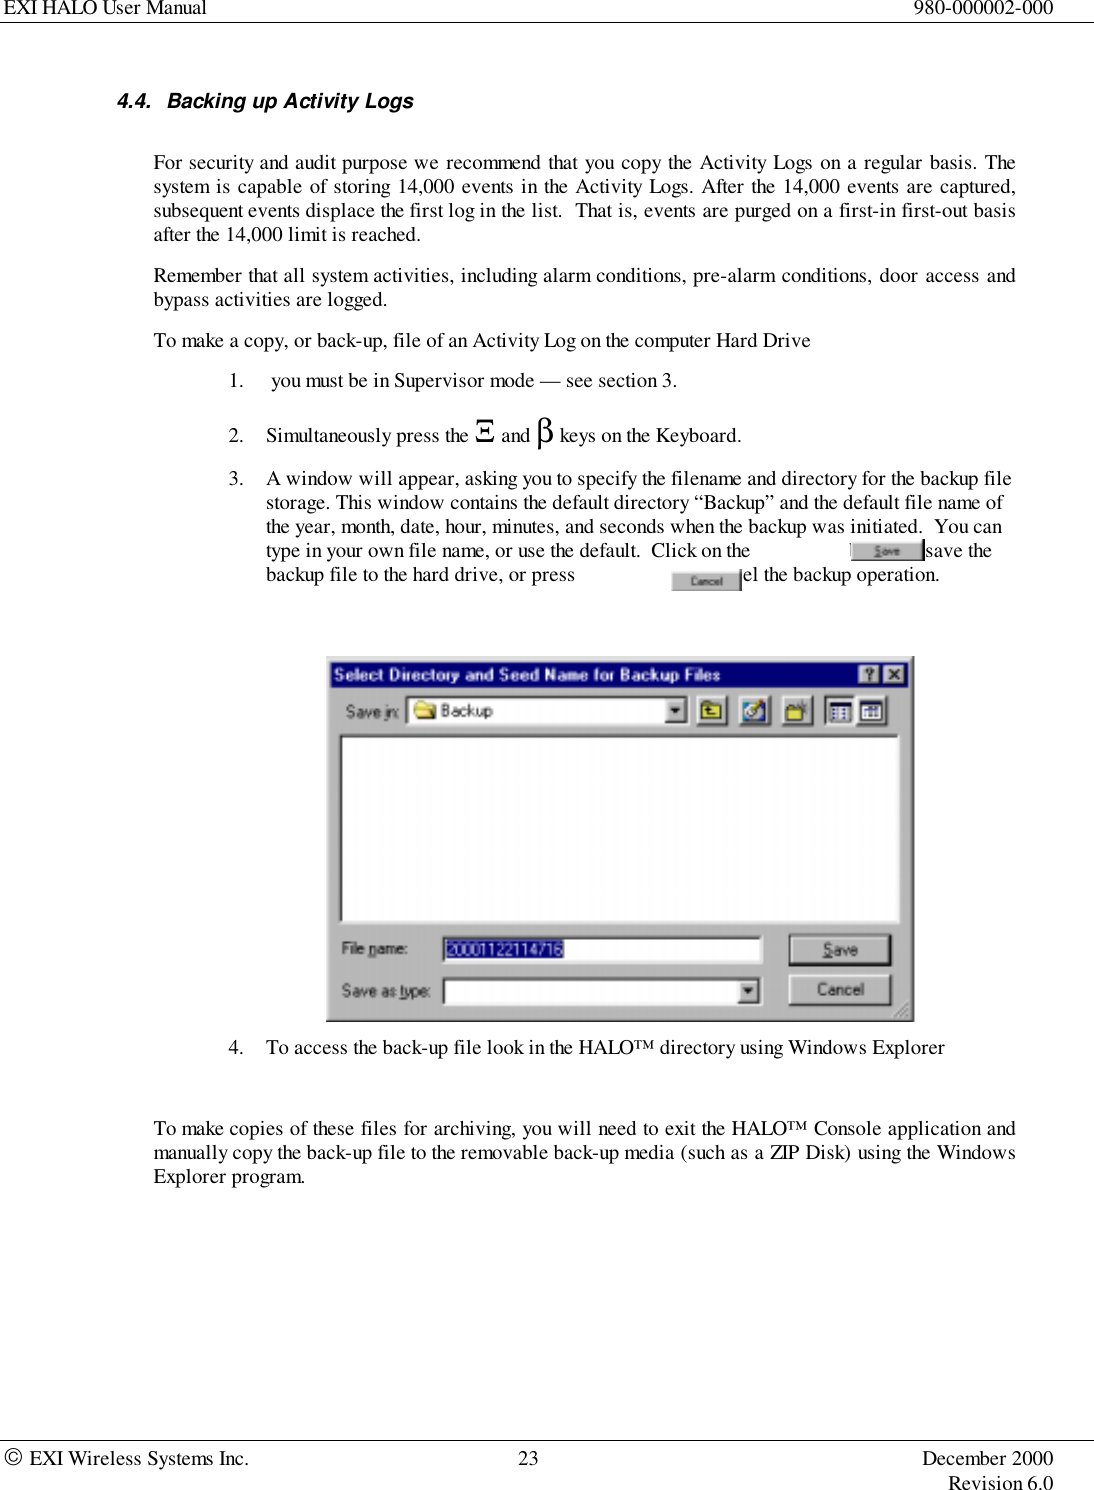 EXI HALO User Manual 980-000002-000 EXI Wireless Systems Inc. 23 December 2000Revision 6.04.4.  Backing up Activity LogsFor security and audit purpose we recommend that you copy the Activity Logs on a regular basis. Thesystem is capable of storing 14,000 events in the Activity Logs. After the 14,000 events are captured,subsequent events displace the first log in the list.  That is, events are purged on a first-in first-out basisafter the 14,000 limit is reached.Remember that all system activities, including alarm conditions, pre-alarm conditions, door access andbypass activities are logged.To make a copy, or back-up, file of an Activity Log on the computer Hard Drive1.  you must be in Supervisor mode — see section 3.2. Simultaneously press the Ξ and β keys on the Keyboard.3. A window will appear, asking you to specify the filename and directory for the backup filestorage. This window contains the default directory “Backup” and the default file name ofthe year, month, date, hour, minutes, and seconds when the backup was initiated.  You cantype in your own file name, or use the default.  Click on the                   button to save thebackup file to the hard drive, or press                     to cancel the backup operation.4. To access the back-up file look in the HALO™ directory using Windows ExplorerTo make copies of these files for archiving, you will need to exit the HALO™ Console application andmanually copy the back-up file to the removable back-up media (such as a ZIP Disk) using the WindowsExplorer program.